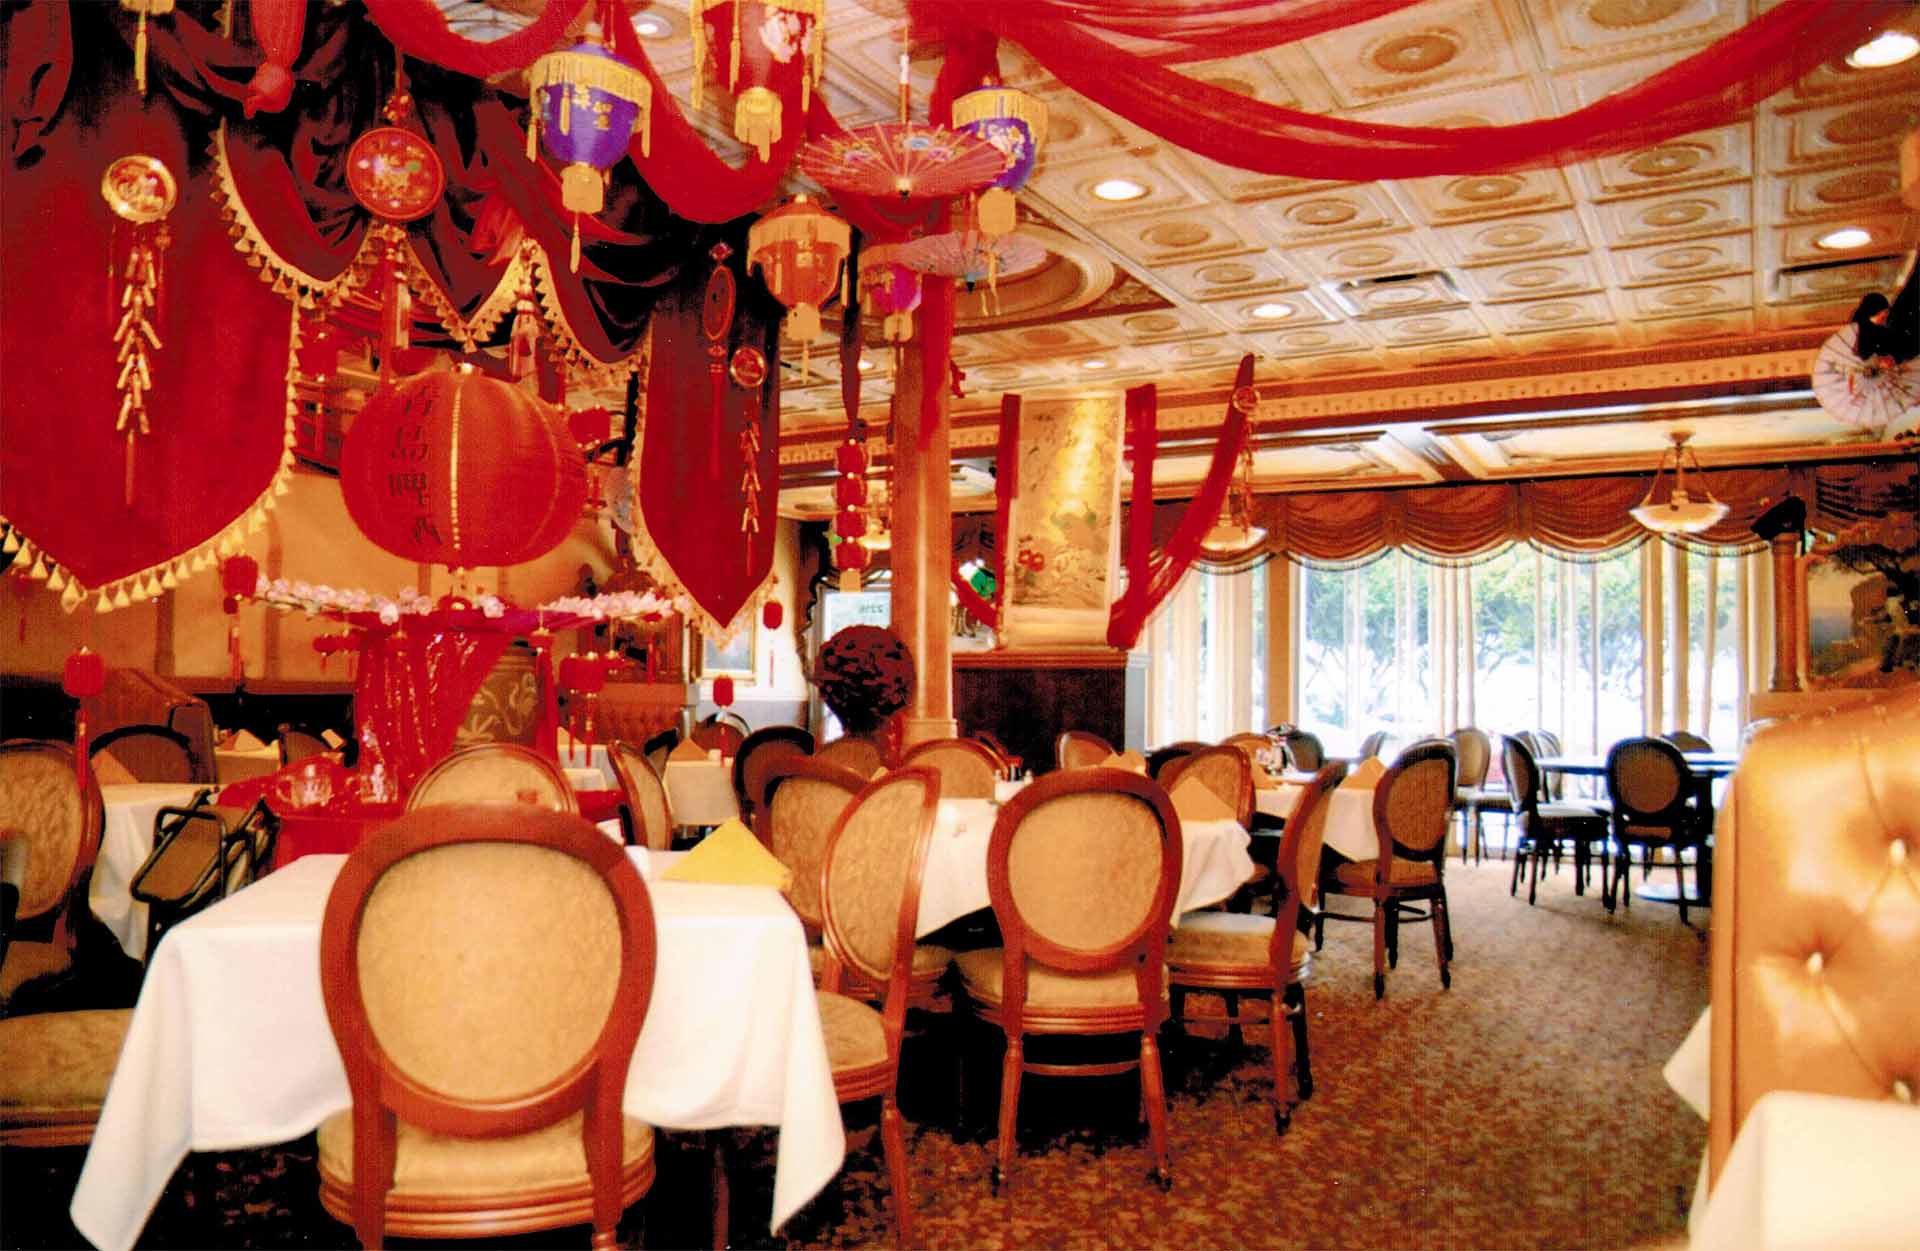 A dining room full of light and color. Intricate multicolored decor is shown hanging above tables draped with white tablecloths.